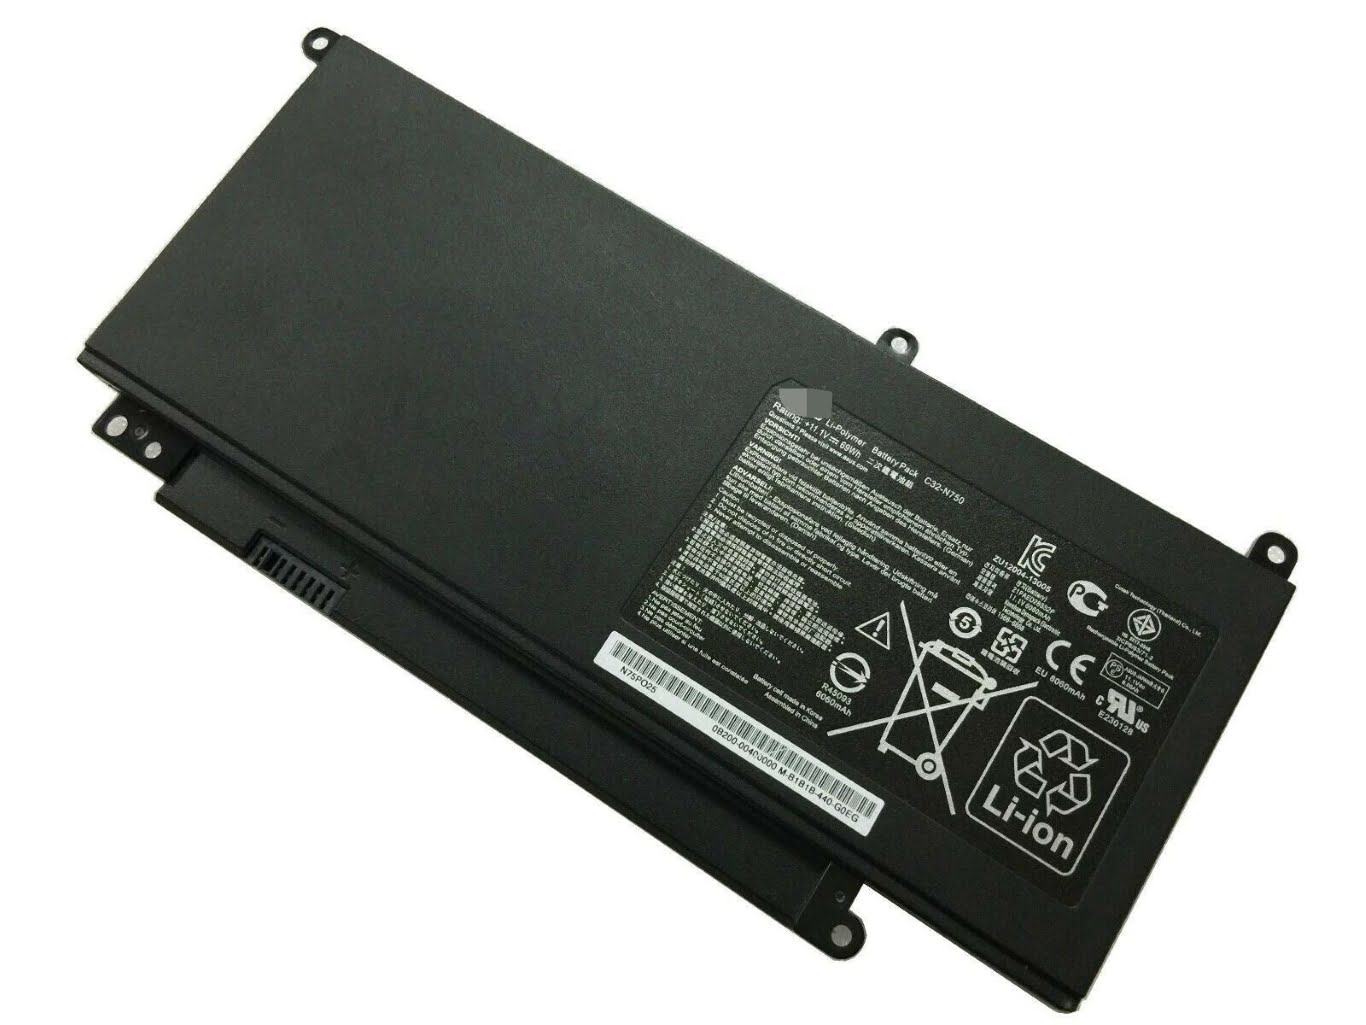 0B200-00400000, C32-N750 replacement Laptop Battery for Asus N750, N750J, 11.1V, 69wh